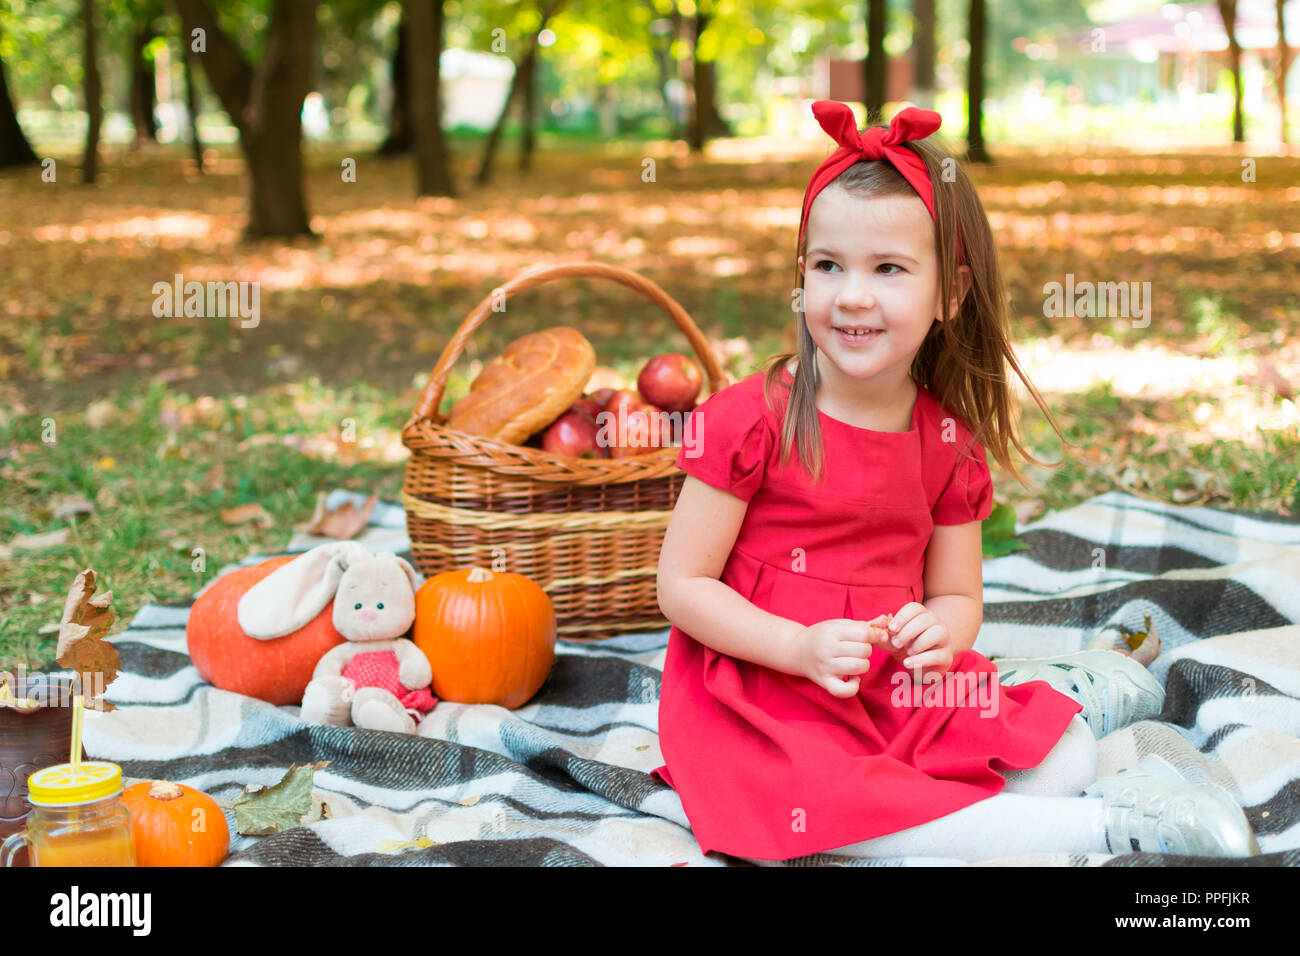 little girl child in a red dress, holding a pumpkin, smiling. autumn picnic in the Park on the plaid basket. Halloween. Stock Photo